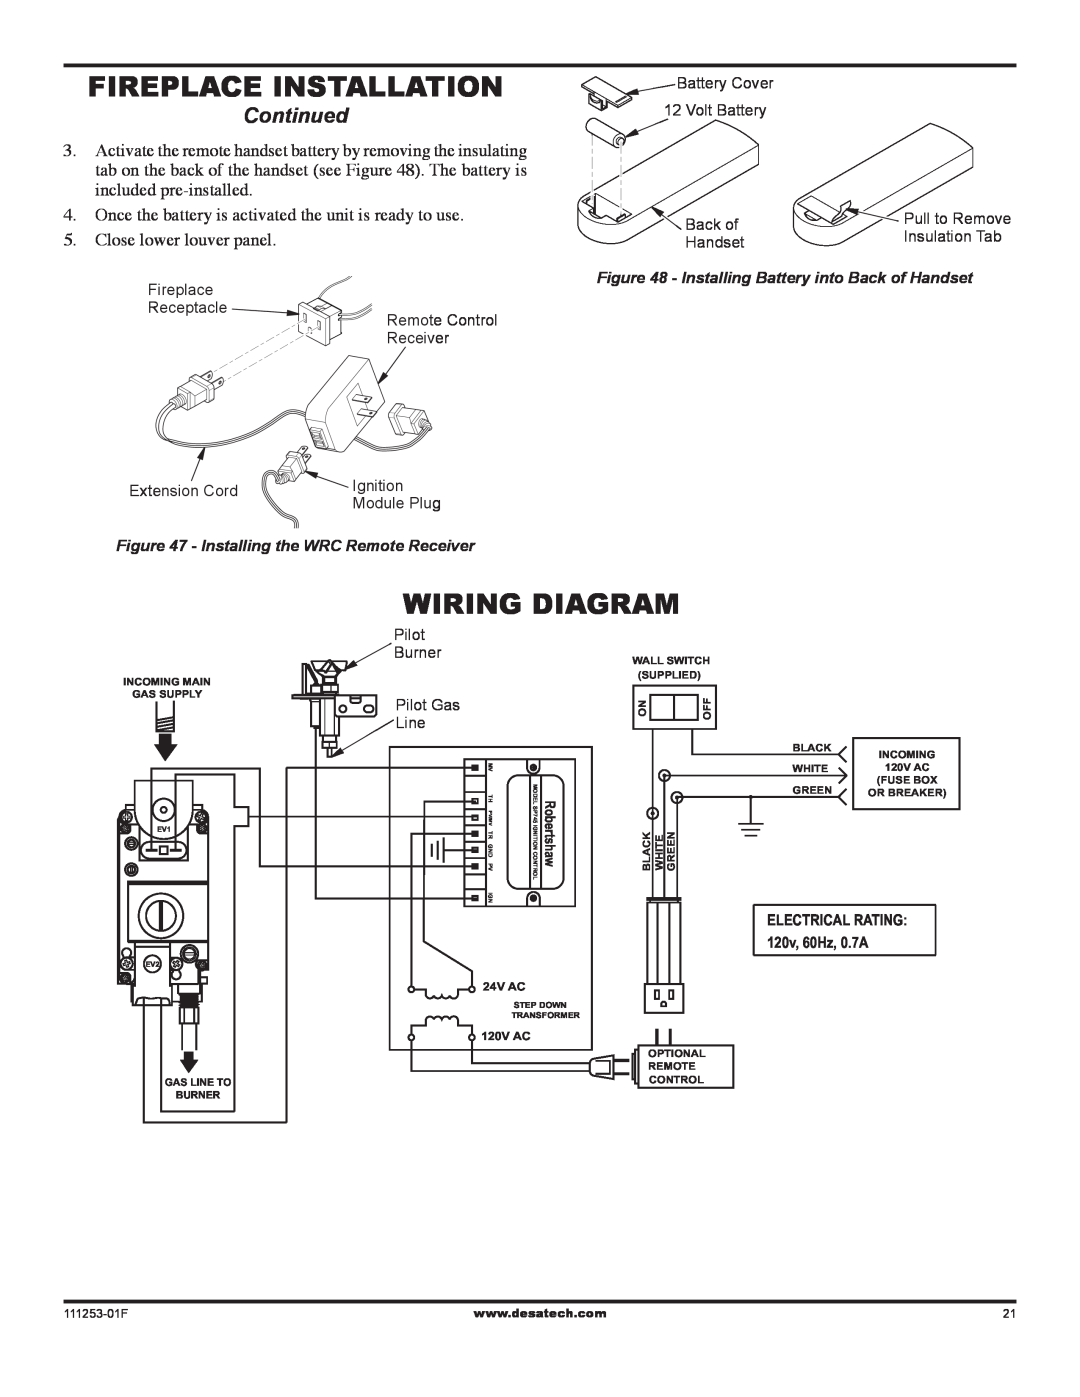 Desa VV36EPC1 SERIES, VV36ENC1 SERIES, (V)V36EN-B, (V)V36EP-B Wiring Diagram, Fireplace Installation, Continued 